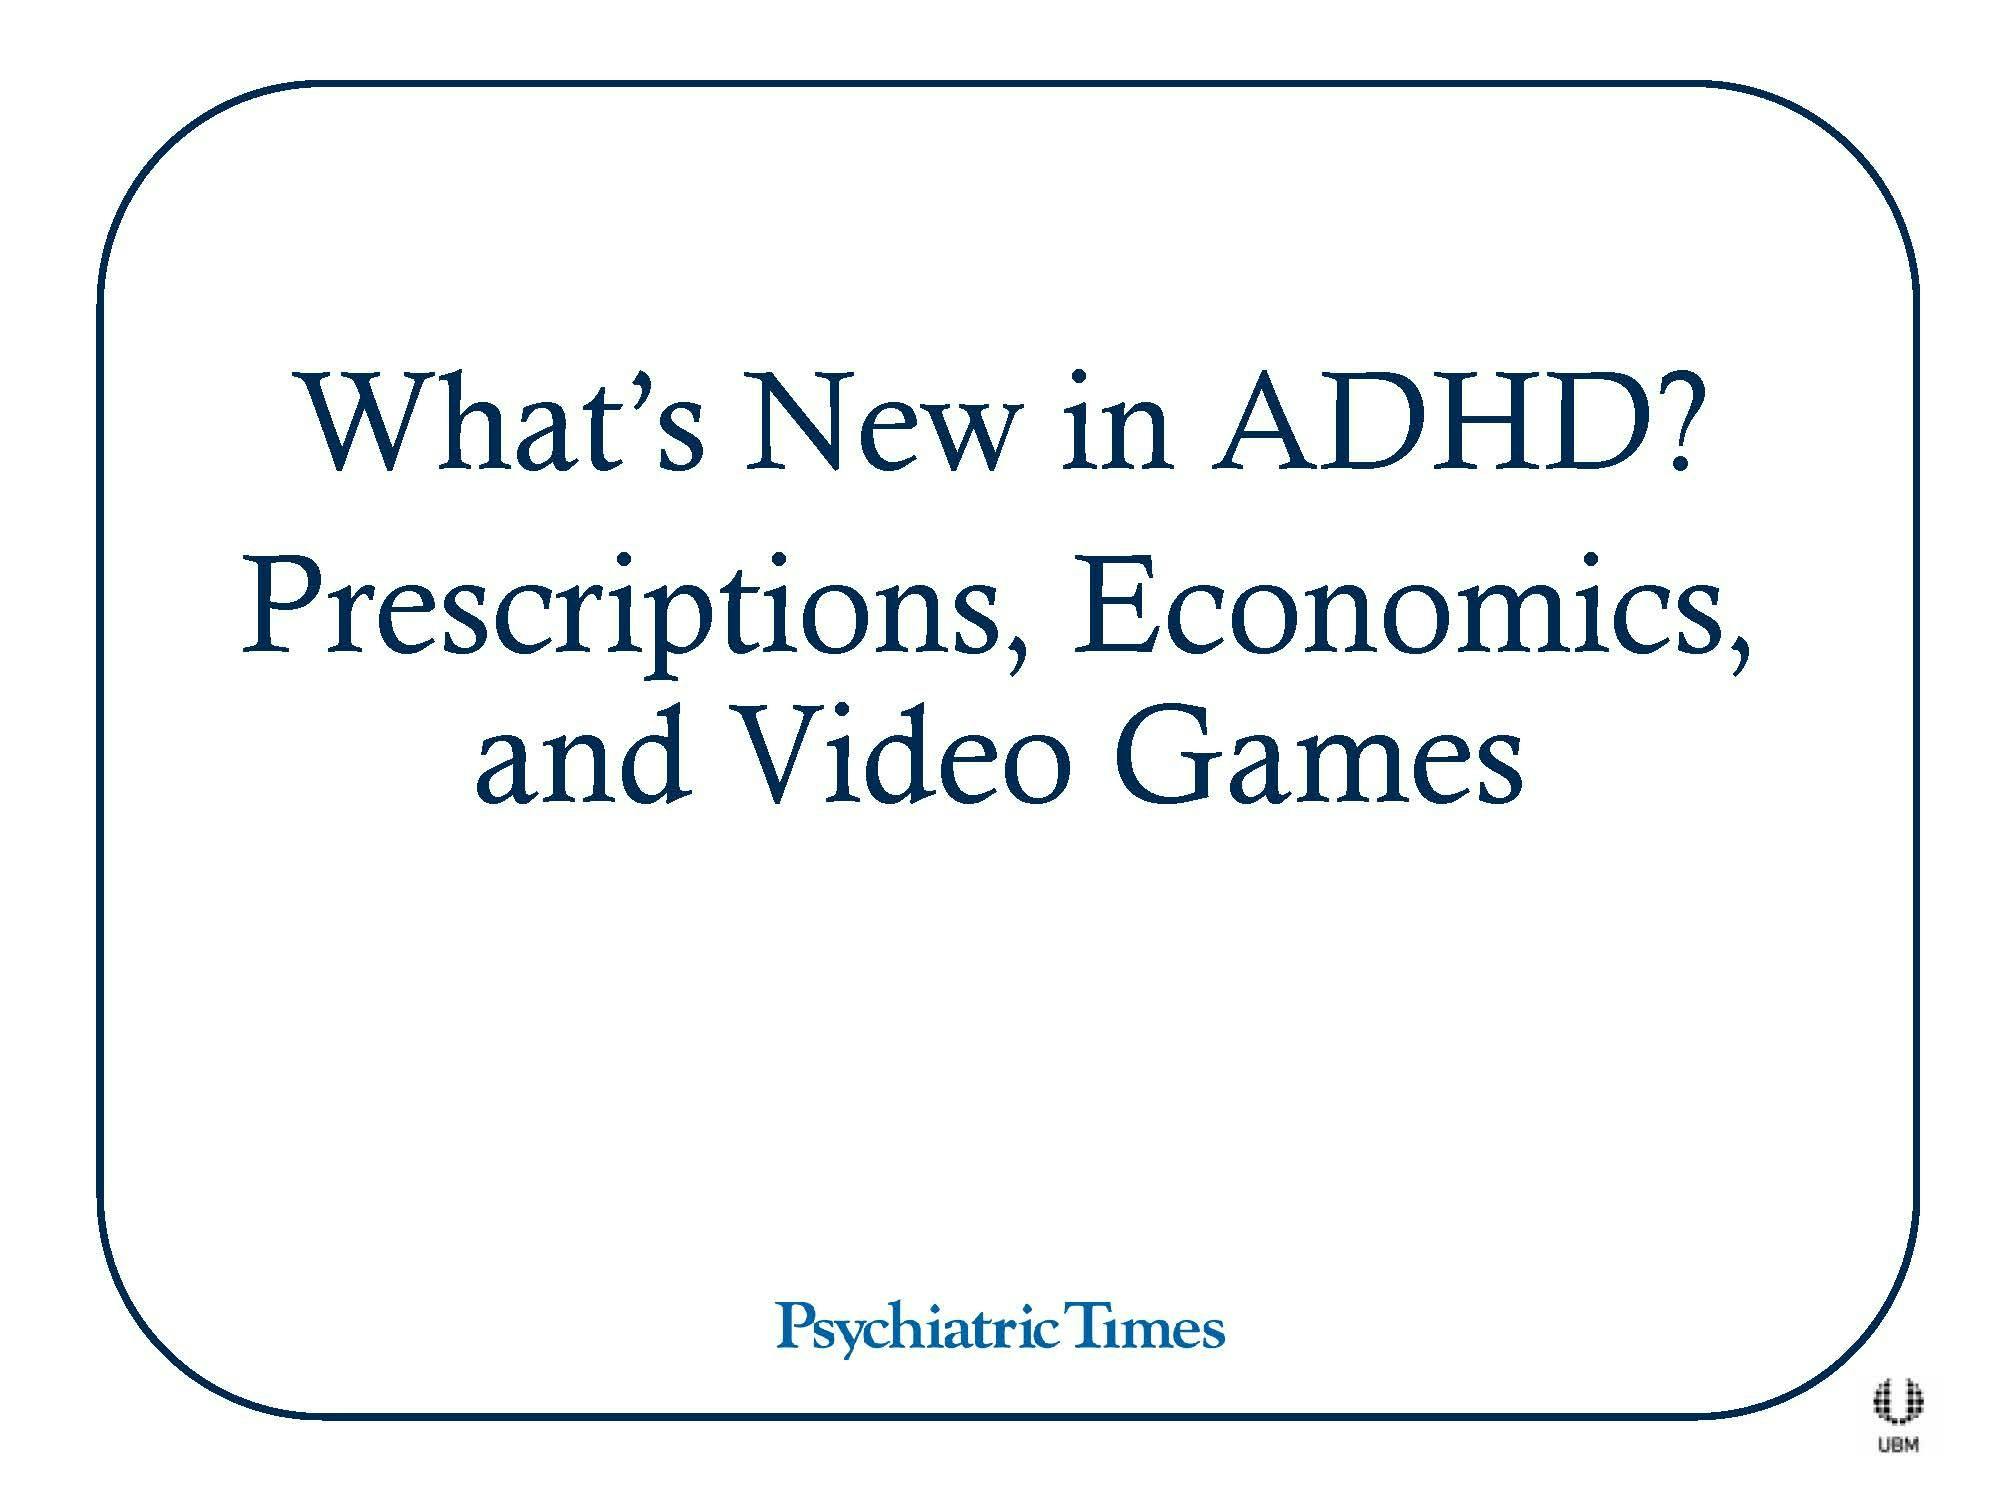 3 New Things About ADHD